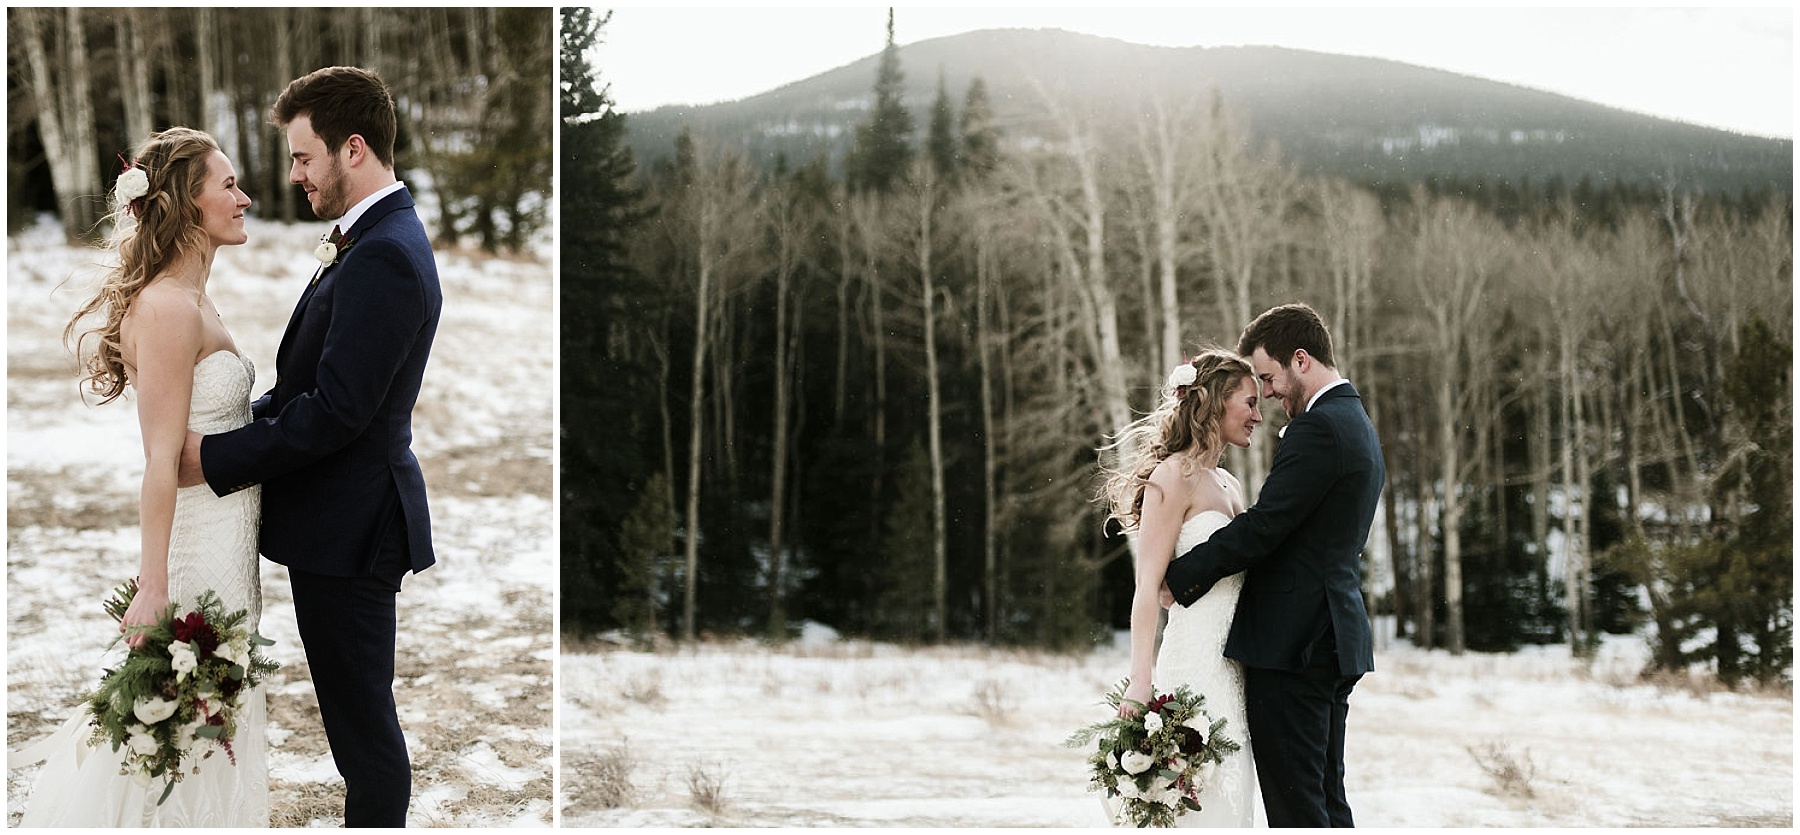 Katesalleyphotography-234_Haley and Dan get married in Estes Park.jpg